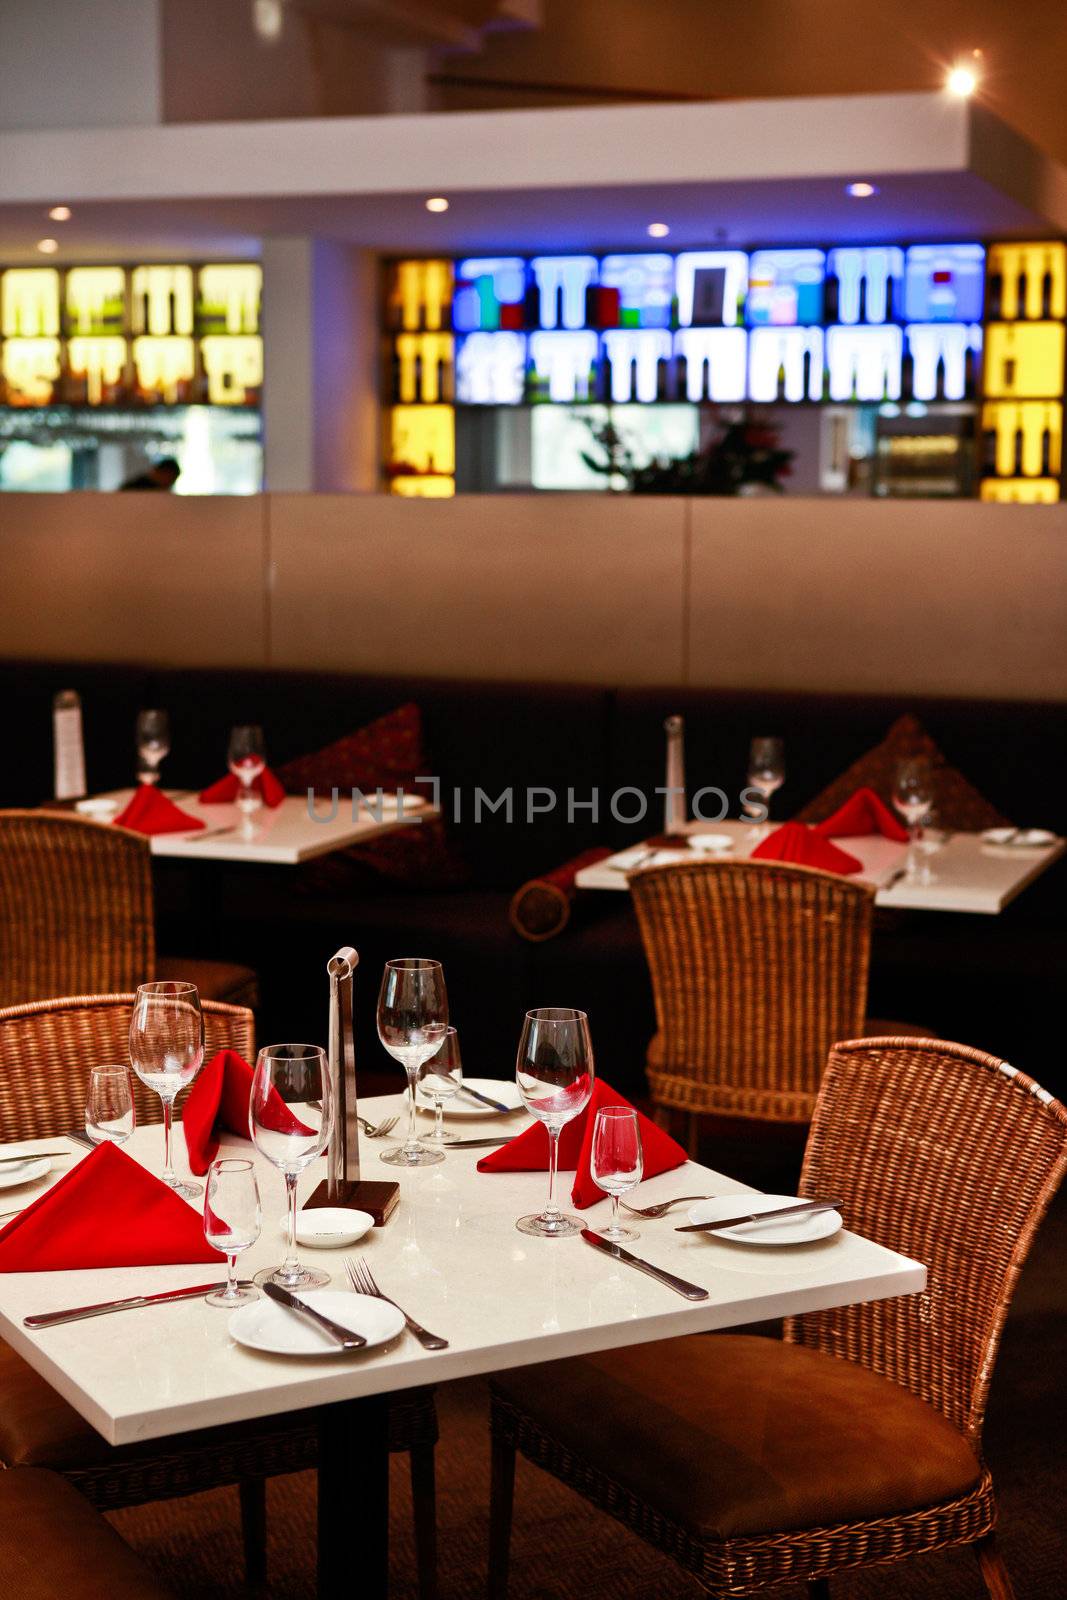 Table settings for dinner with colourful linen and wineglasses in an empty restaurant interior